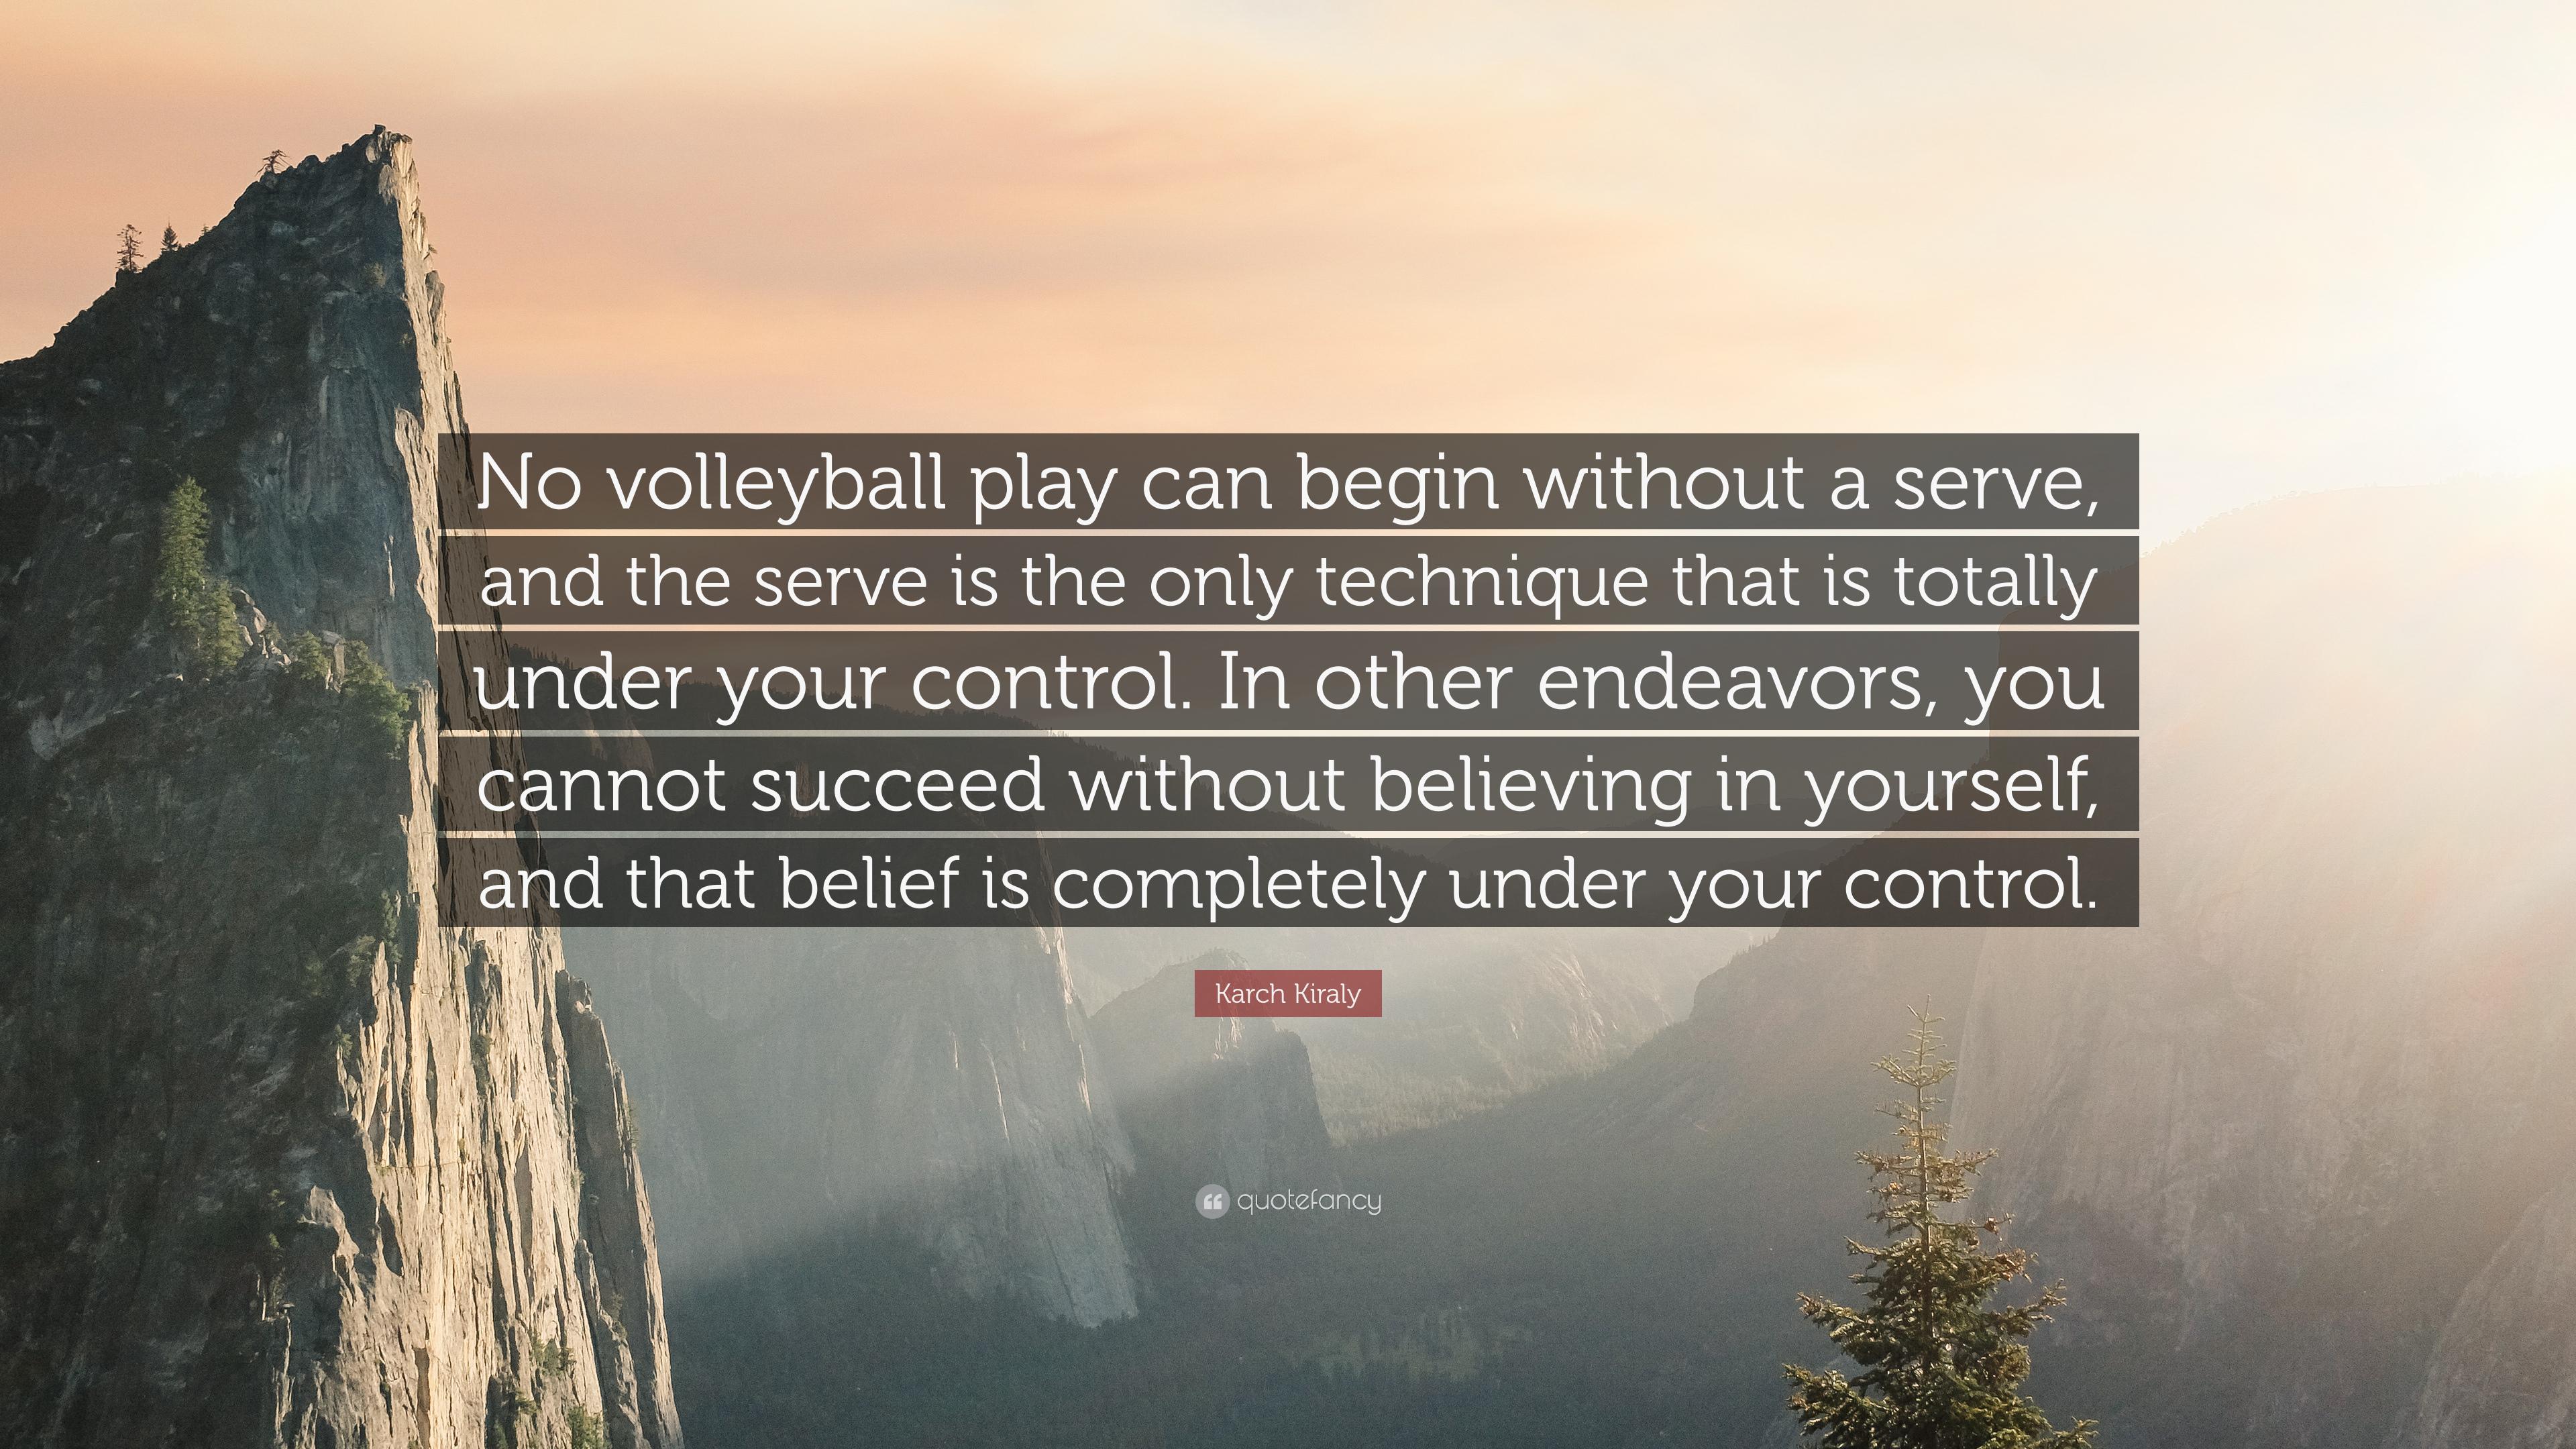 Karch Kiraly Quote: “No volleyball play can begin without a serve